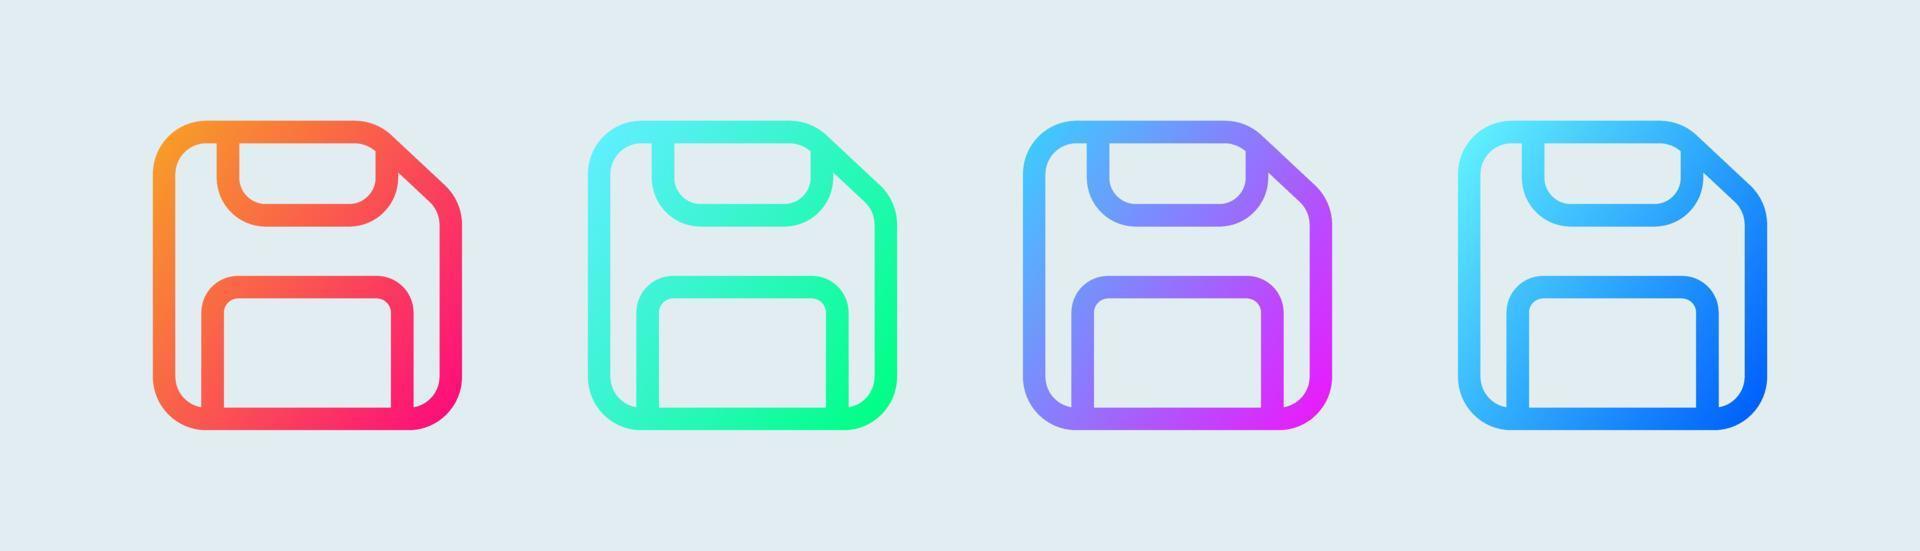 Disk line icon in gradient colors. Floppy disk vector sign for storage.